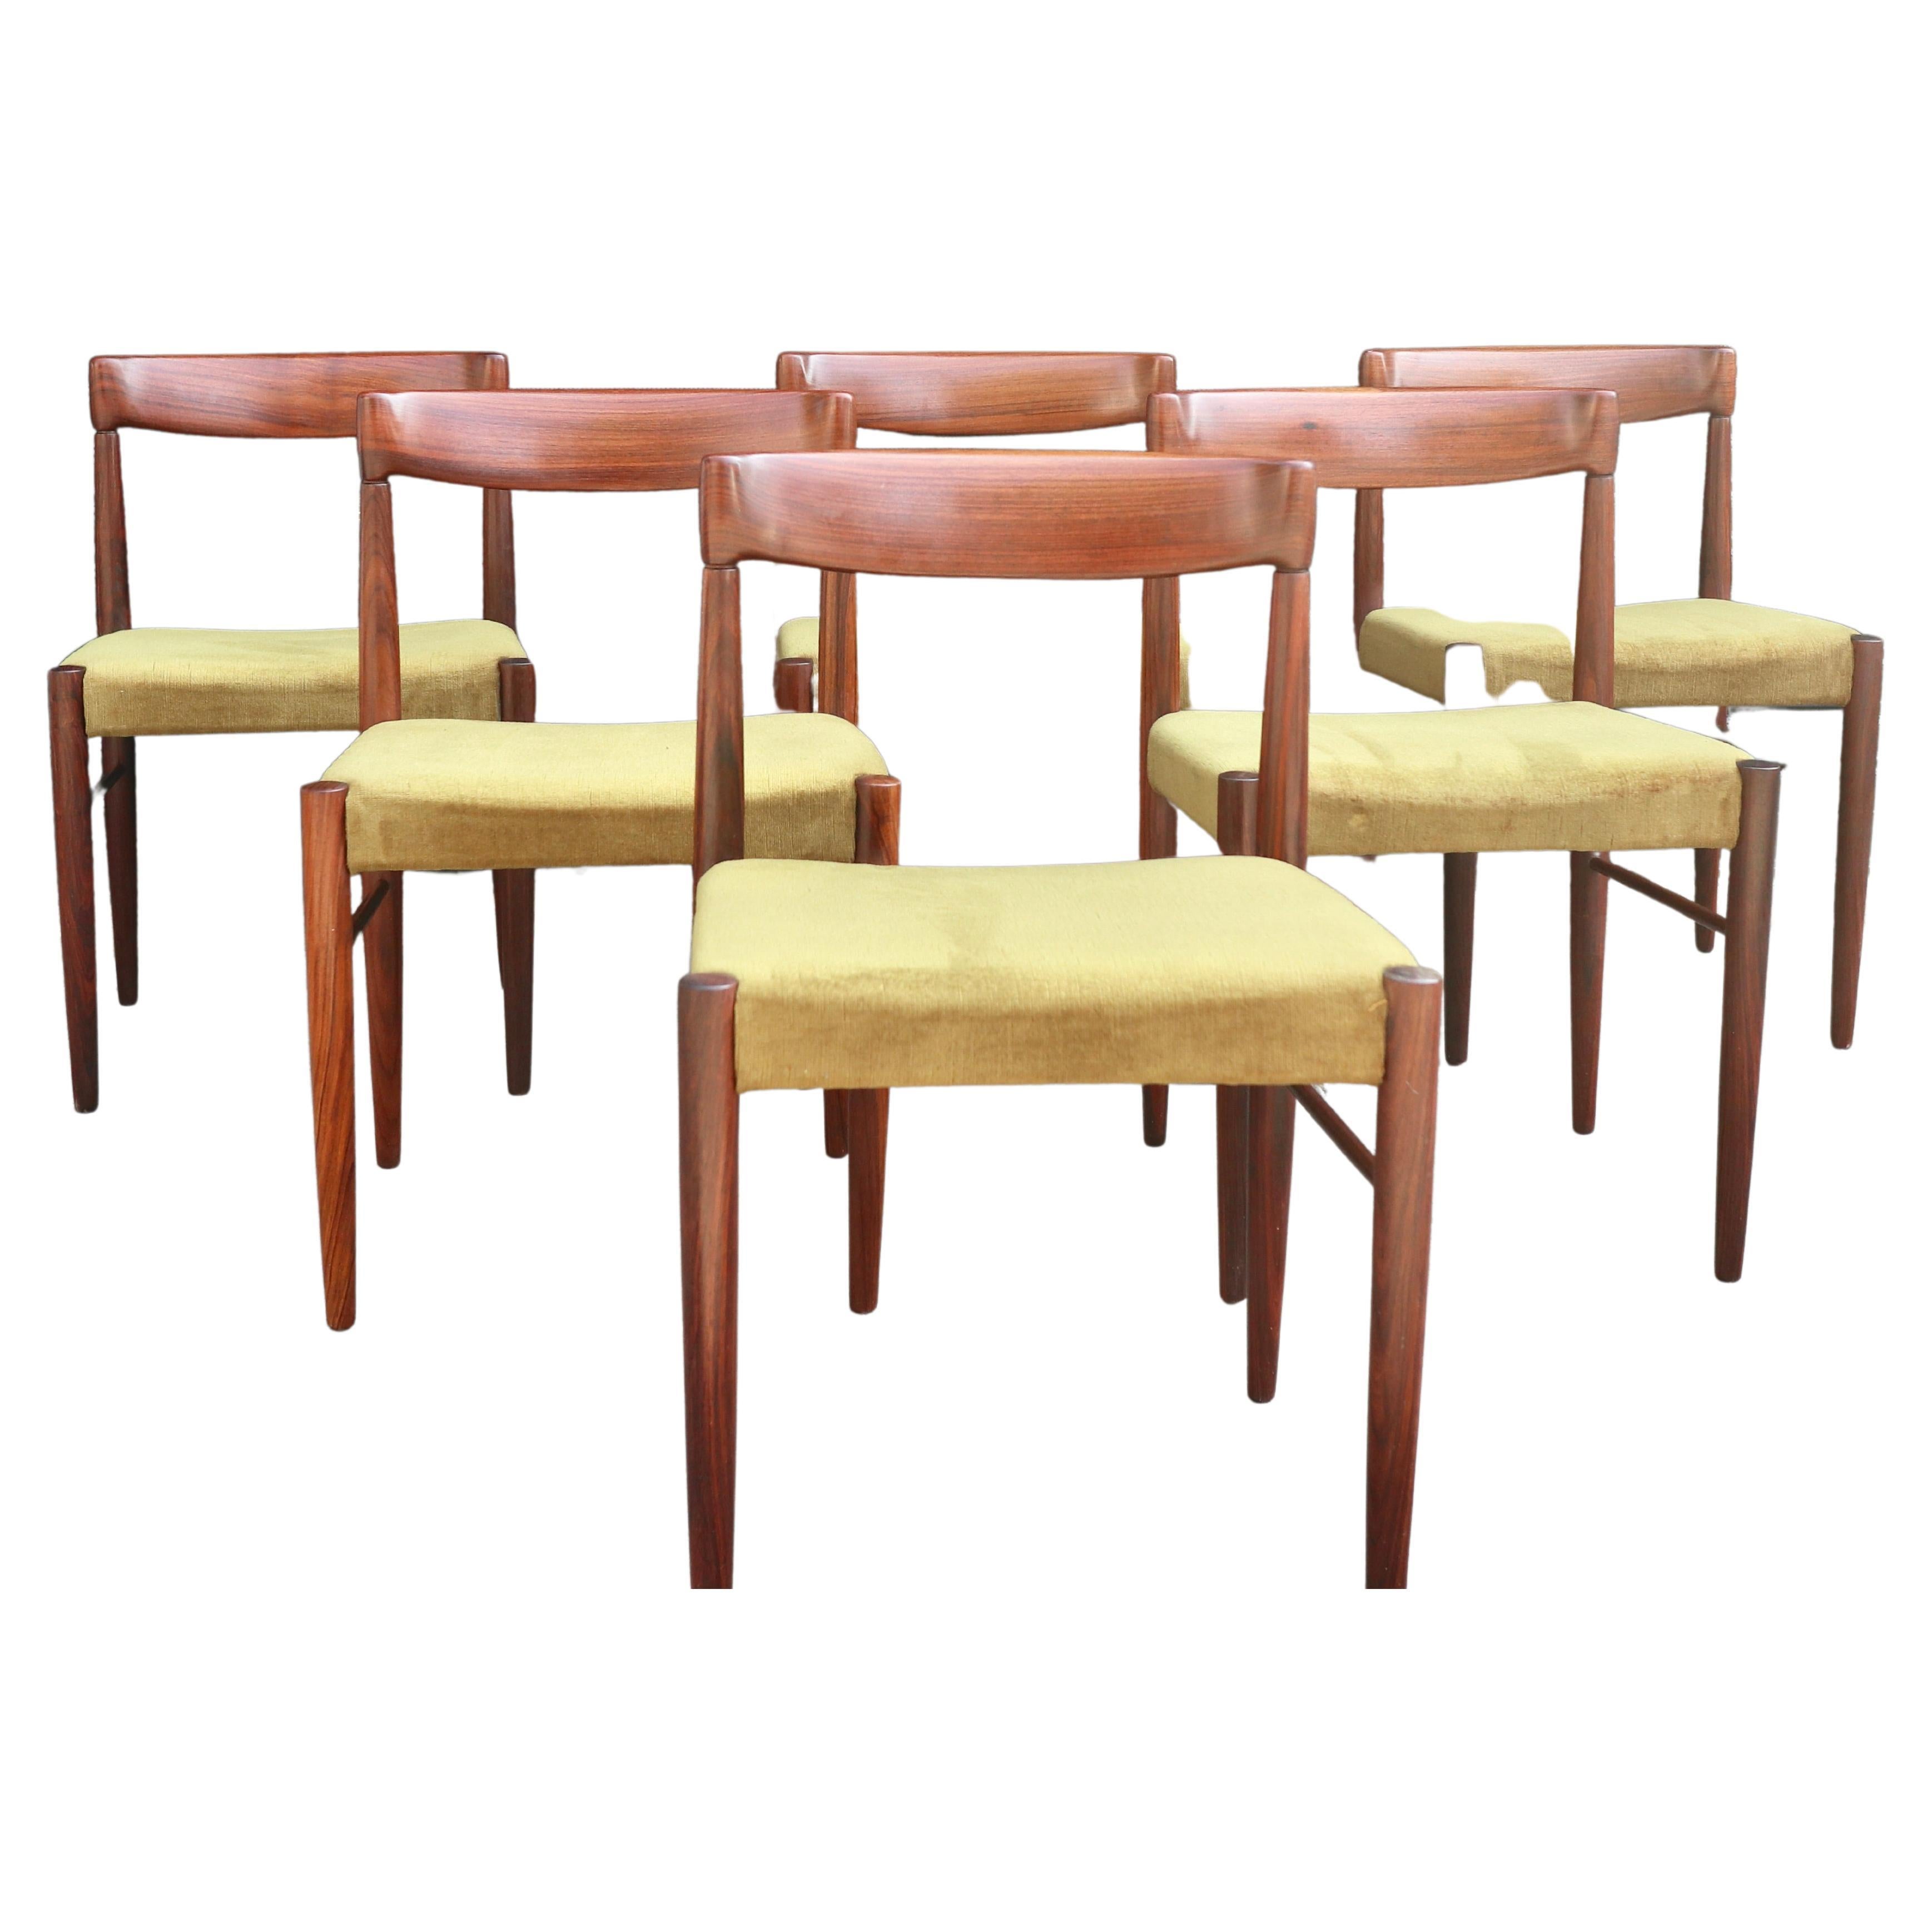 A vintage set of six Danish 1960s Rosewood dining chairs by H W Klein for Bramin